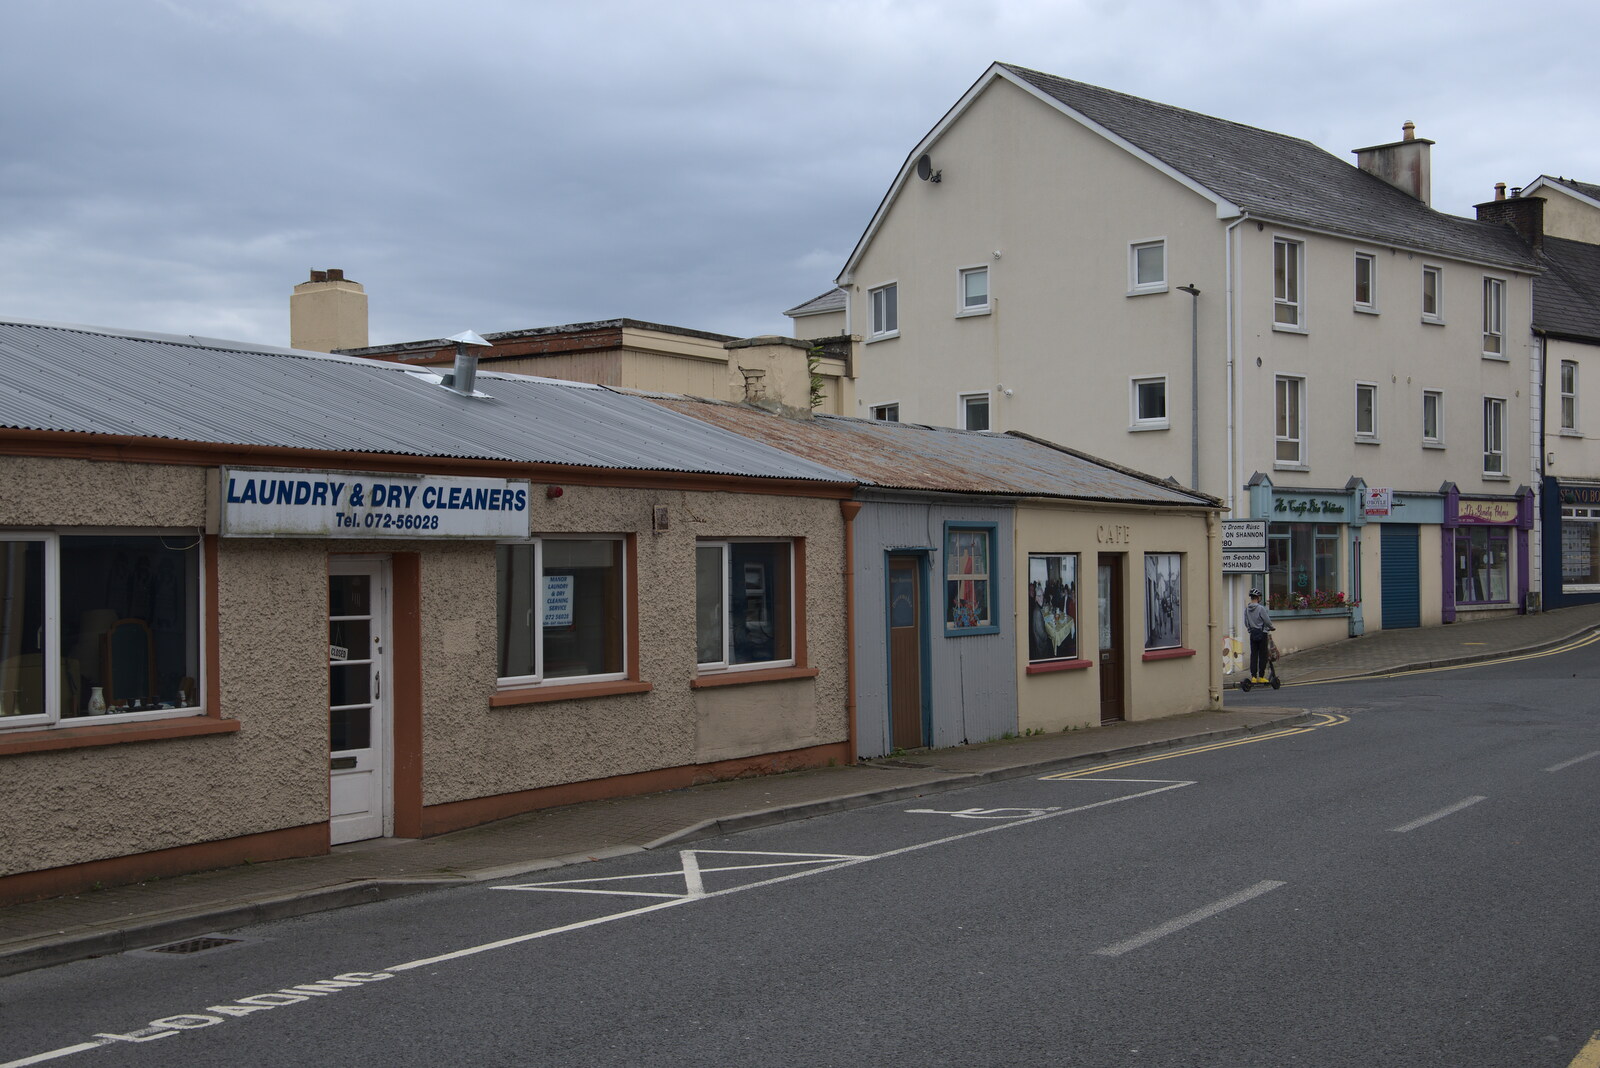 A Trip to Manorhamilton, County Leitrim, Ireland - 11th August 2021: More closed-down shops on Main Street